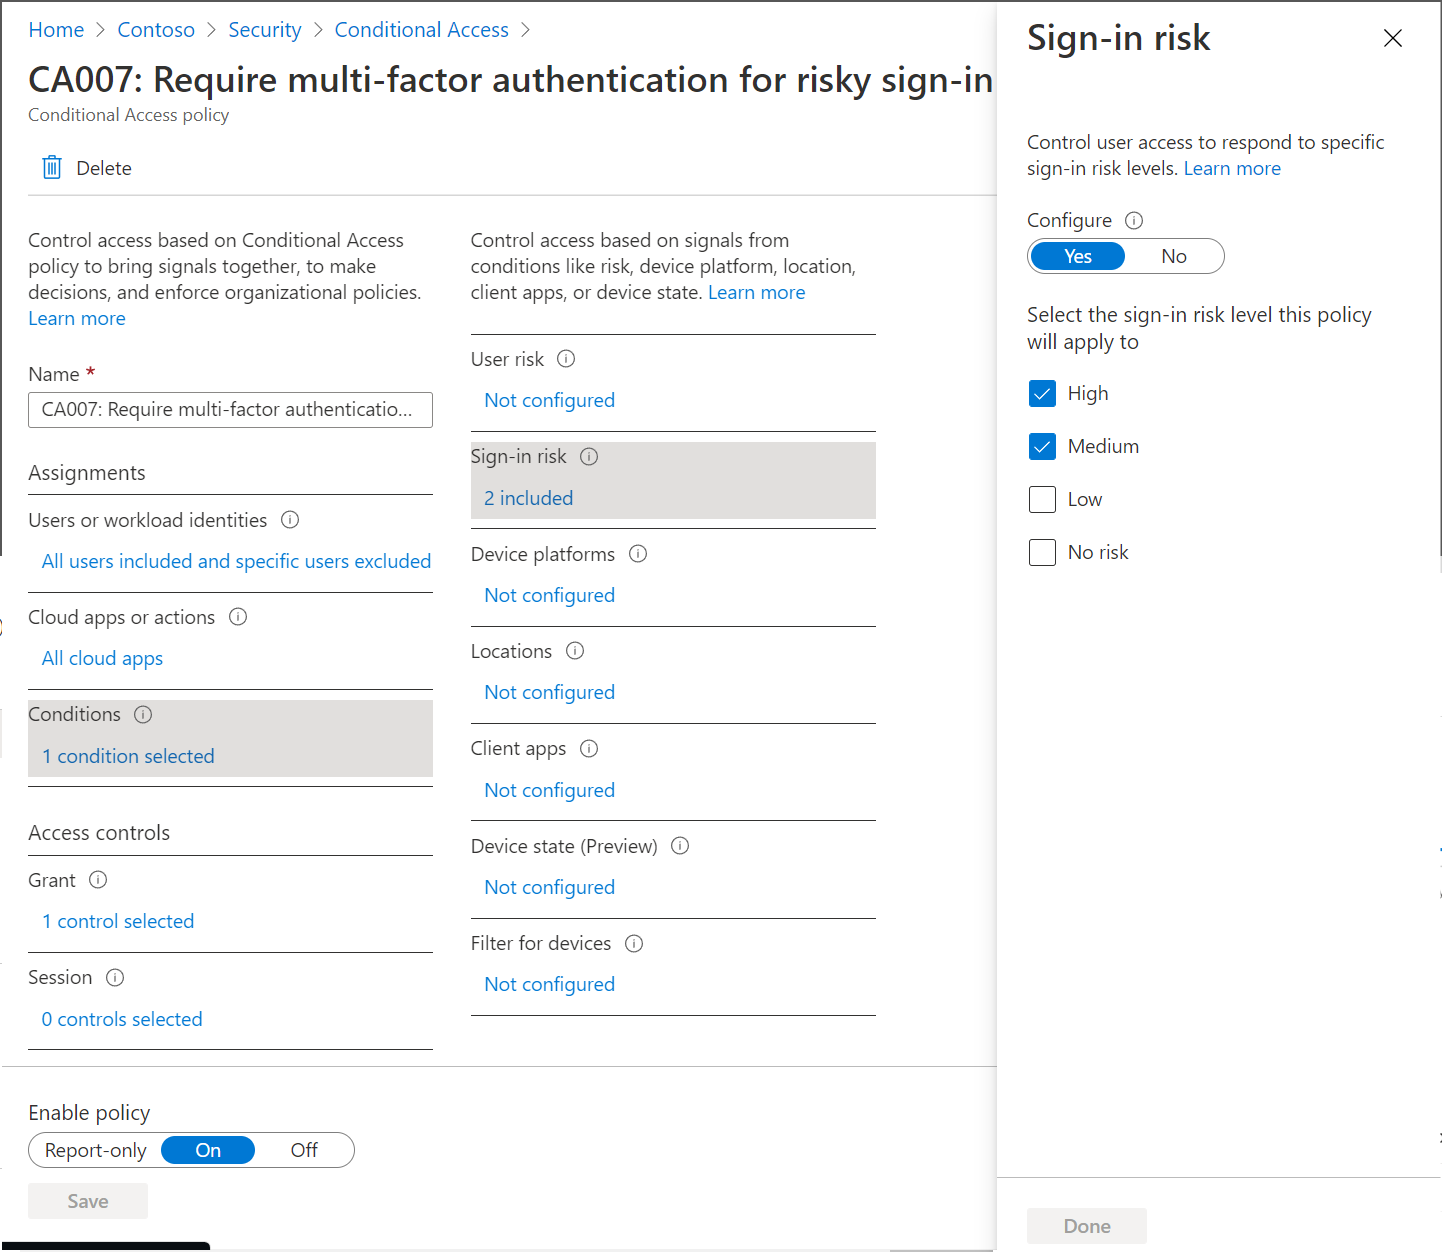 Conditional Access policy requiring MFA for medium and high risk sign-ins.